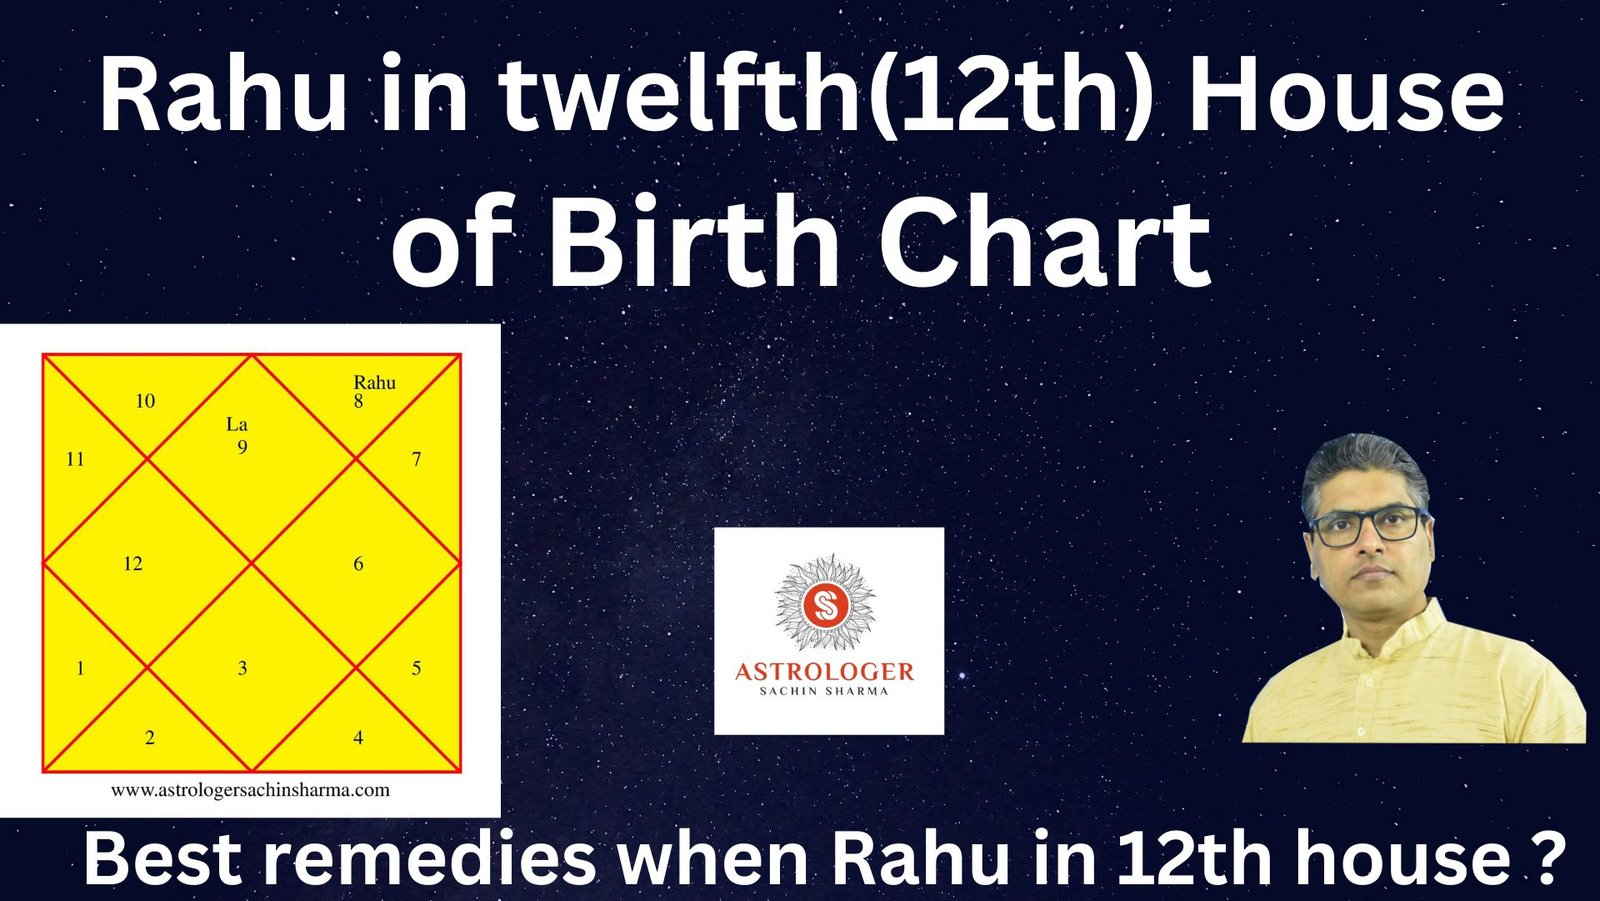 Rahu in 12th house of birth chart